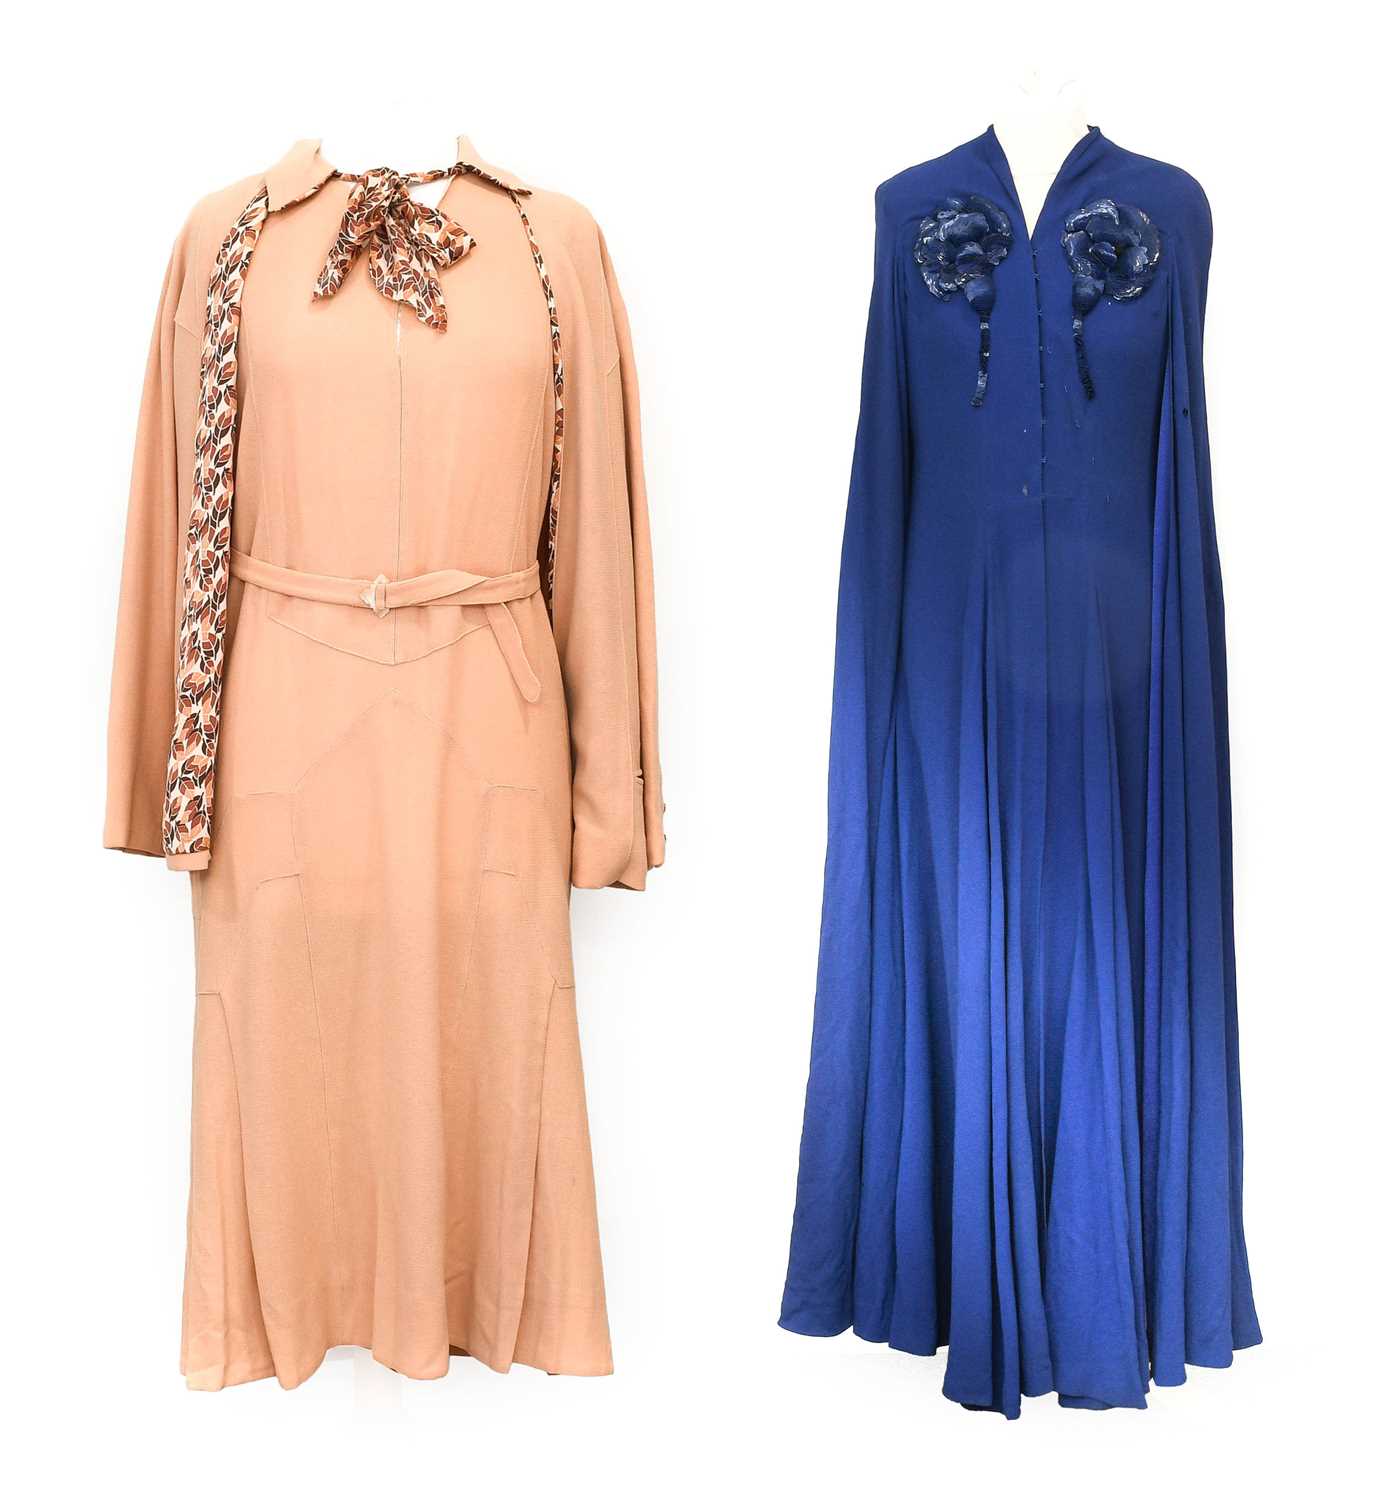 Circa 1930s and Later Ladies Evening Wear, comprising a peach crepe day dress, matching jacket - Image 4 of 53